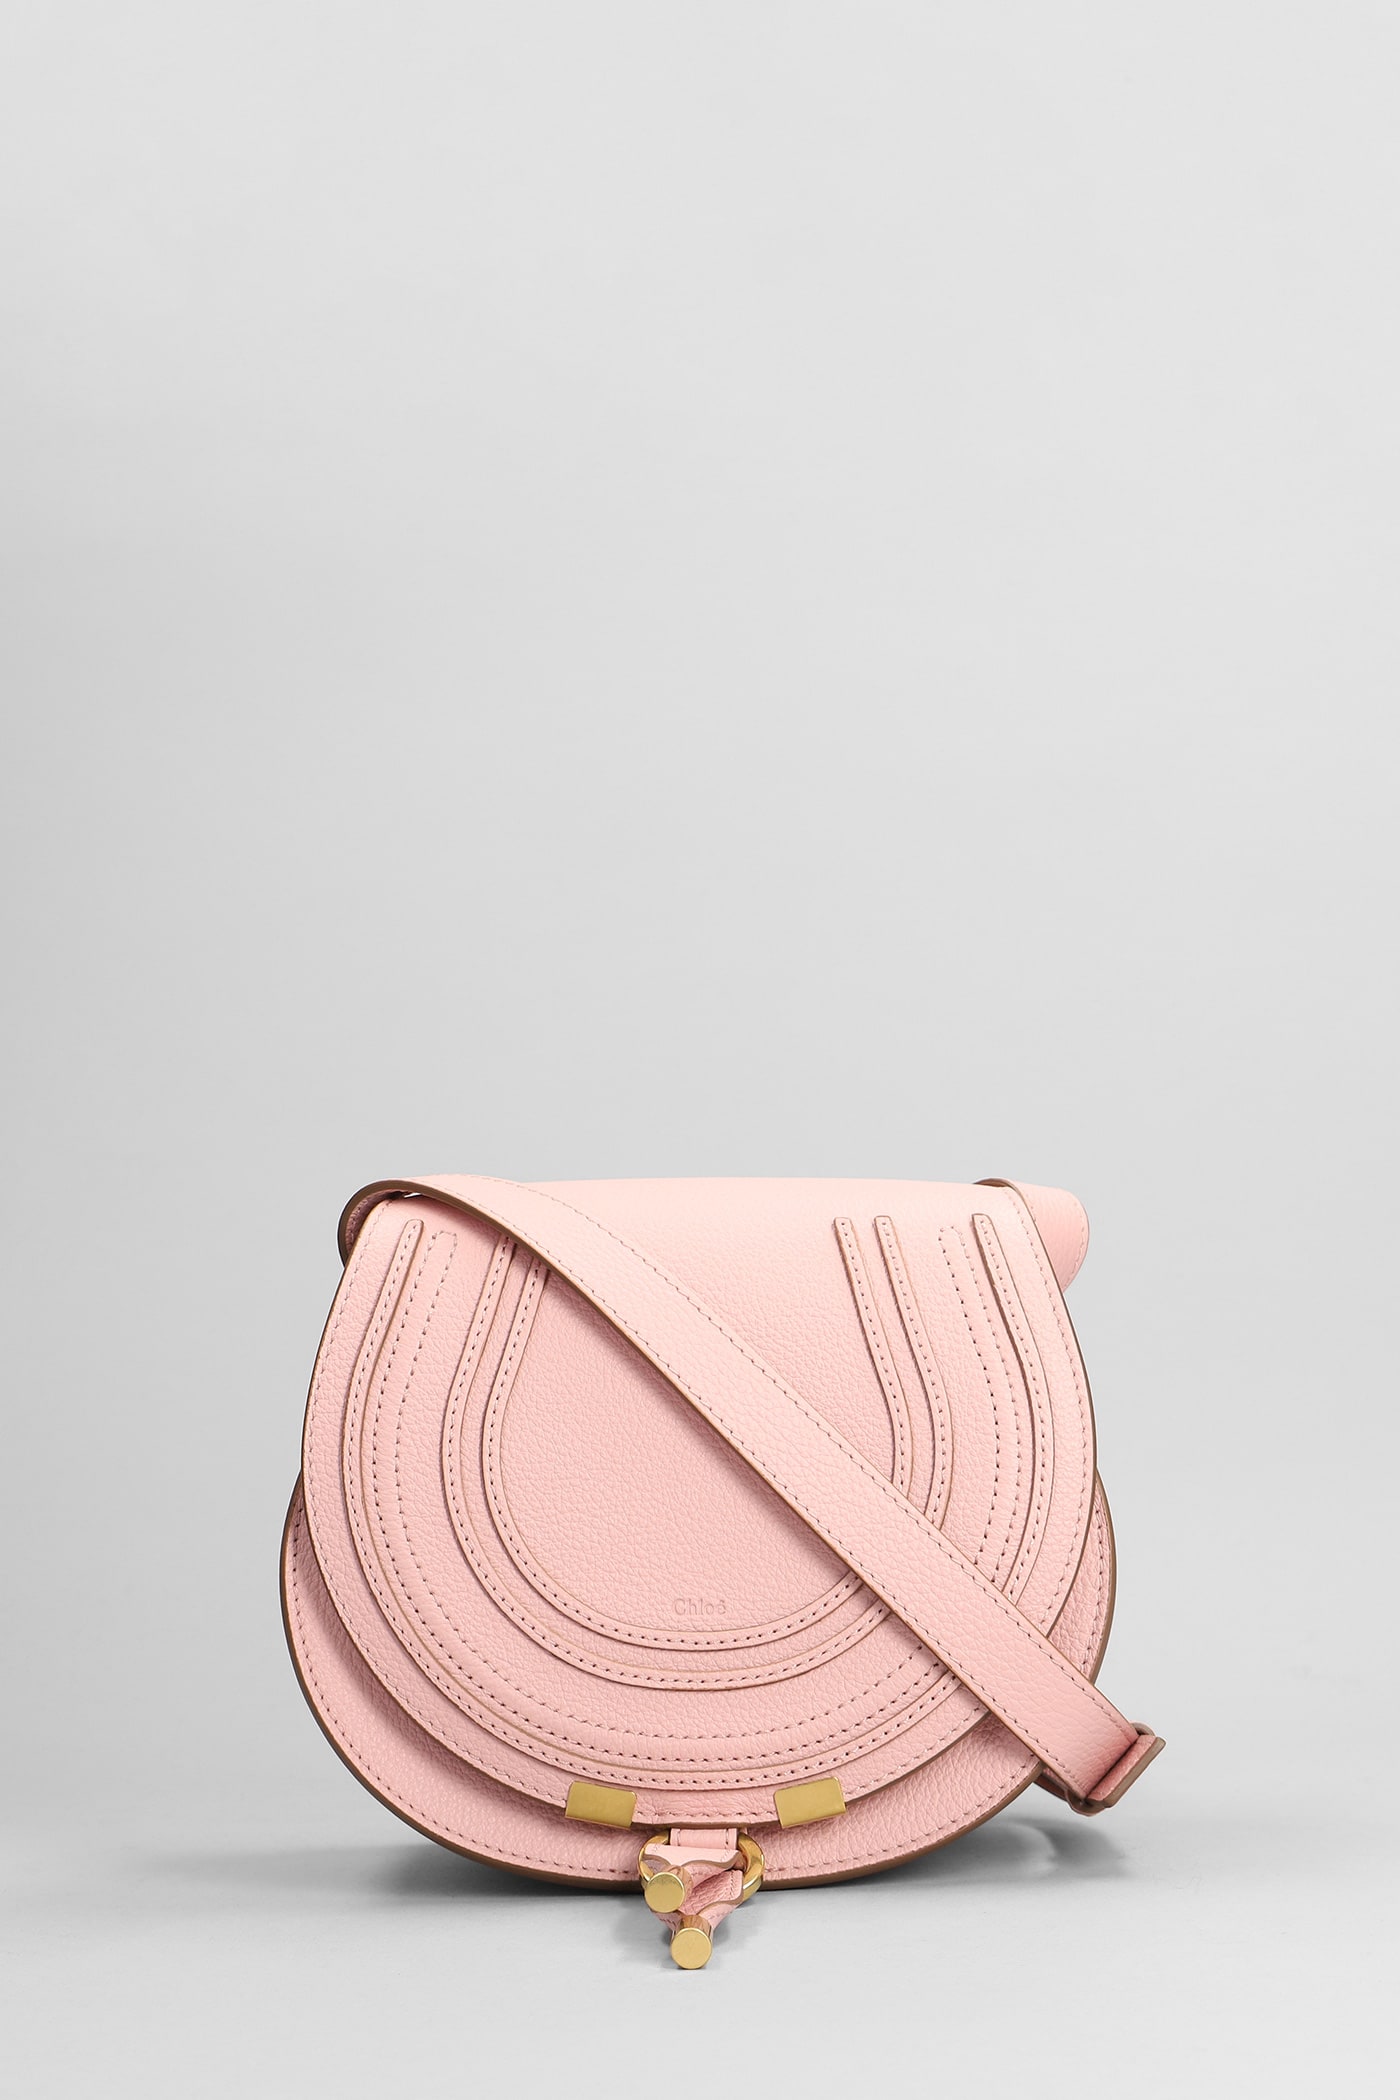 Chloé Mercie Small Shoulder Bag In Rose-pink Leather